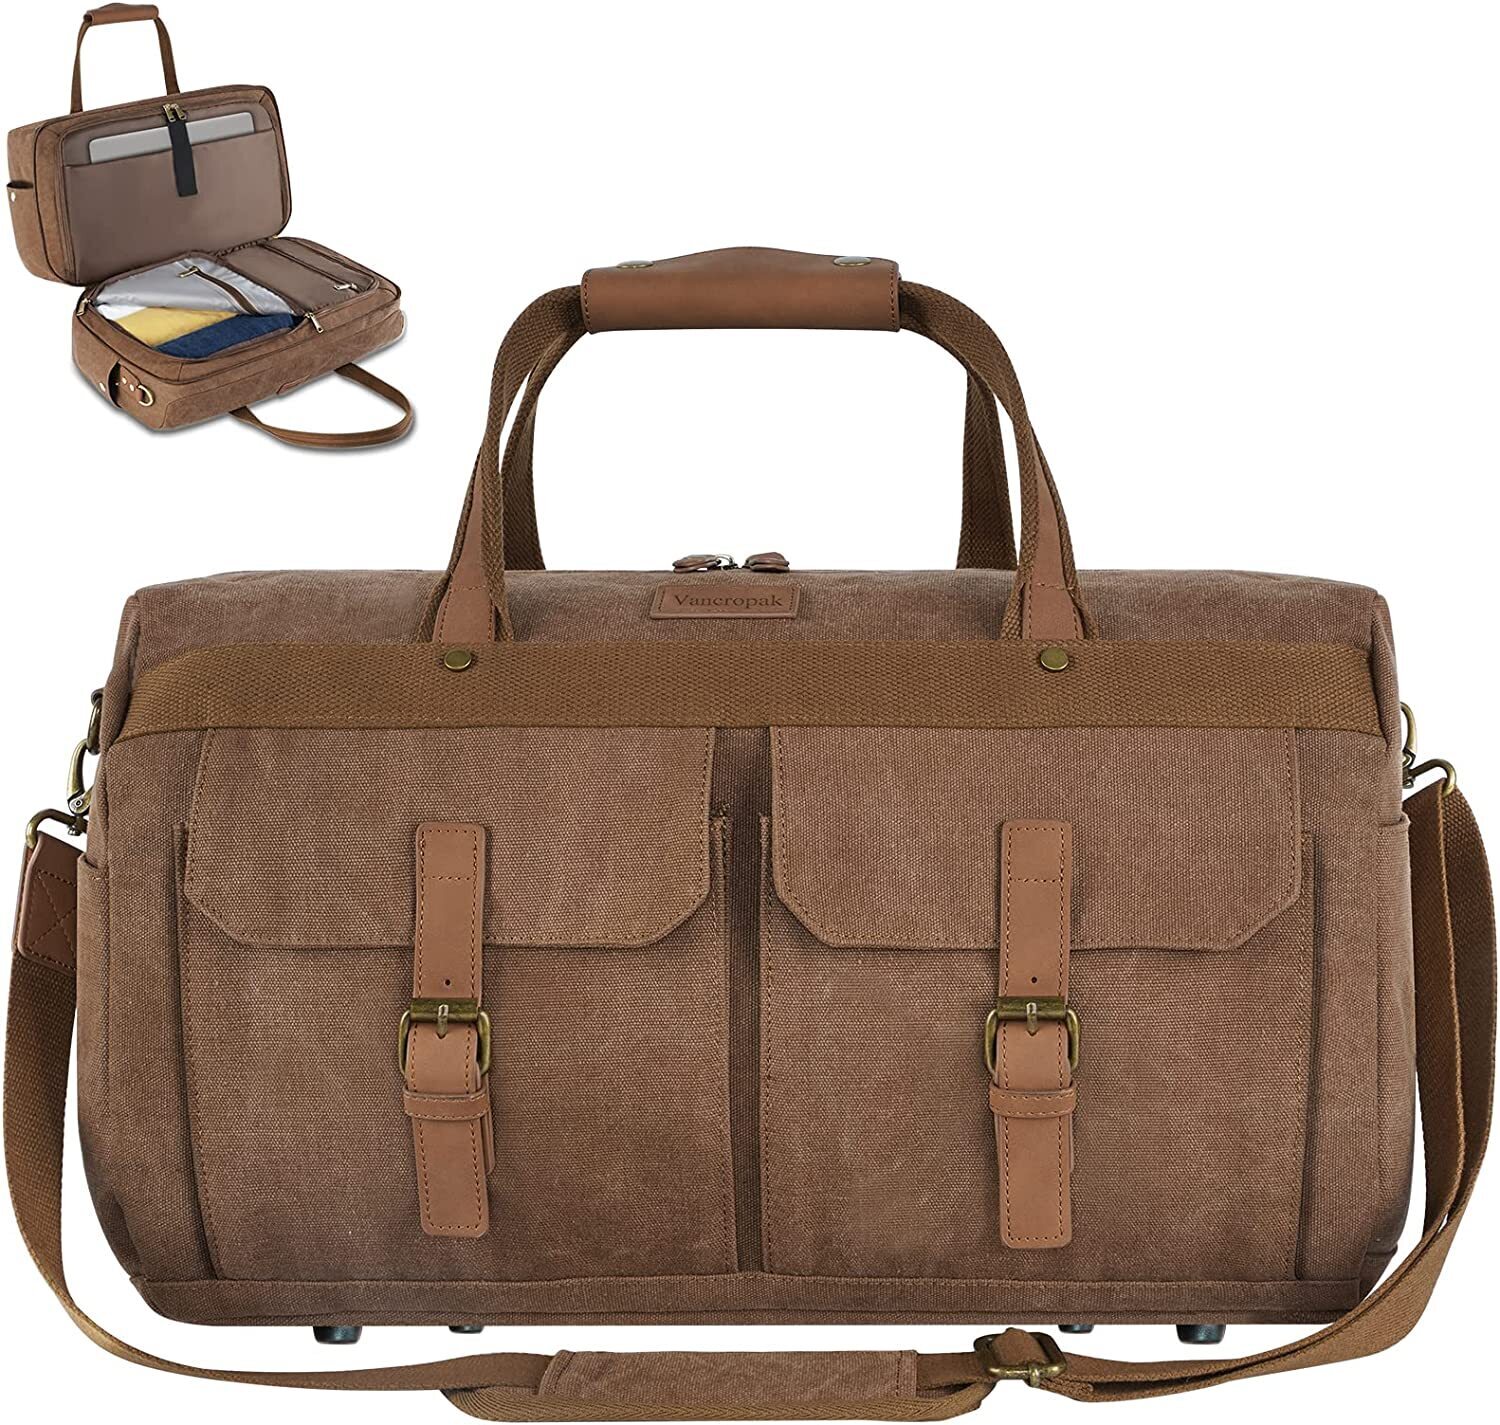 Brown Canvas Duffle Bag With Laptop Compartment